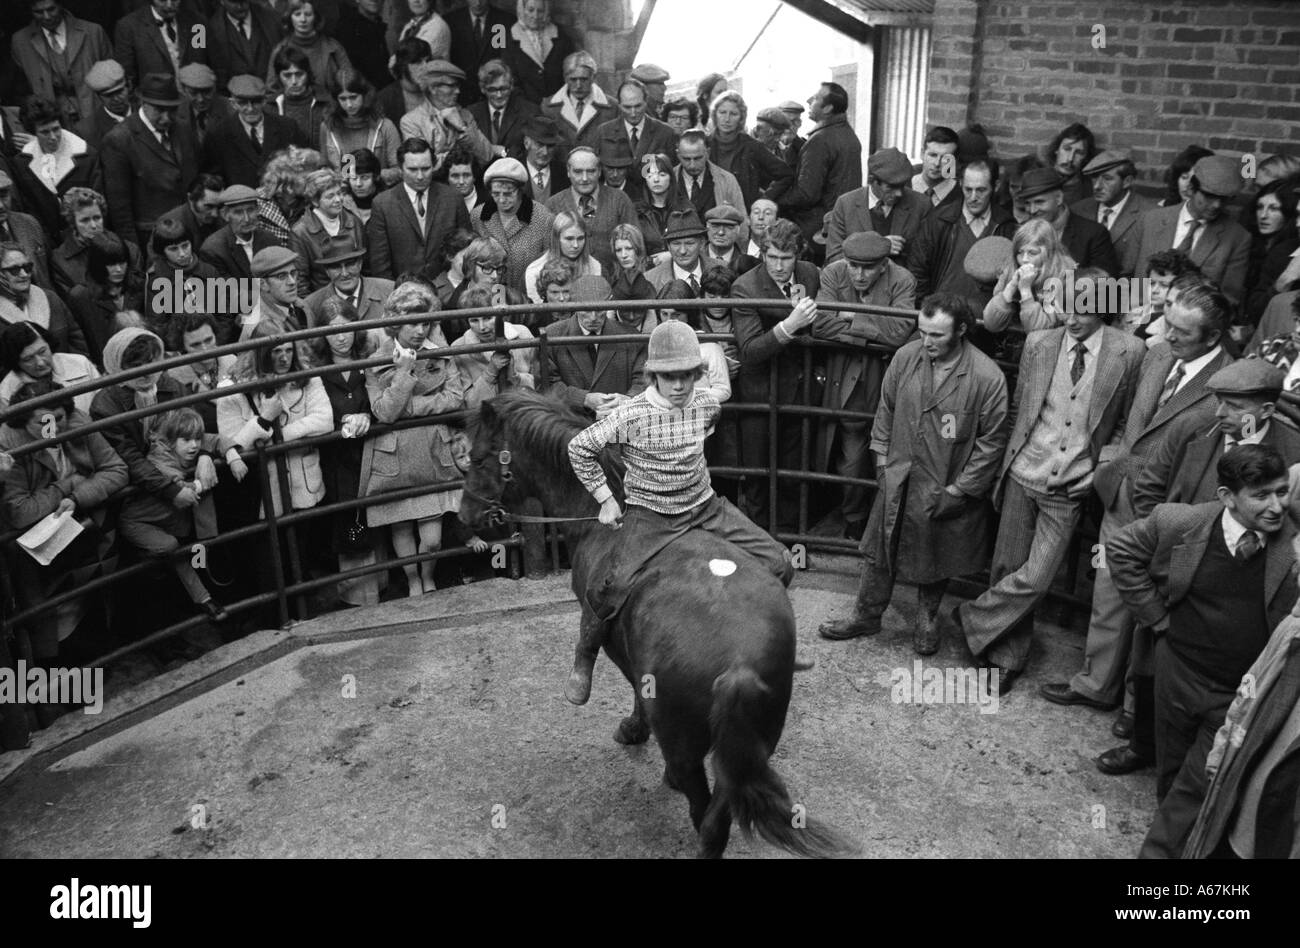 1970s farmers at auction showing horse at an annual horse sale. Boy riding child proof horse bareback without saddle. Hatherleigh, Devon 1973 UK. Stock Photo